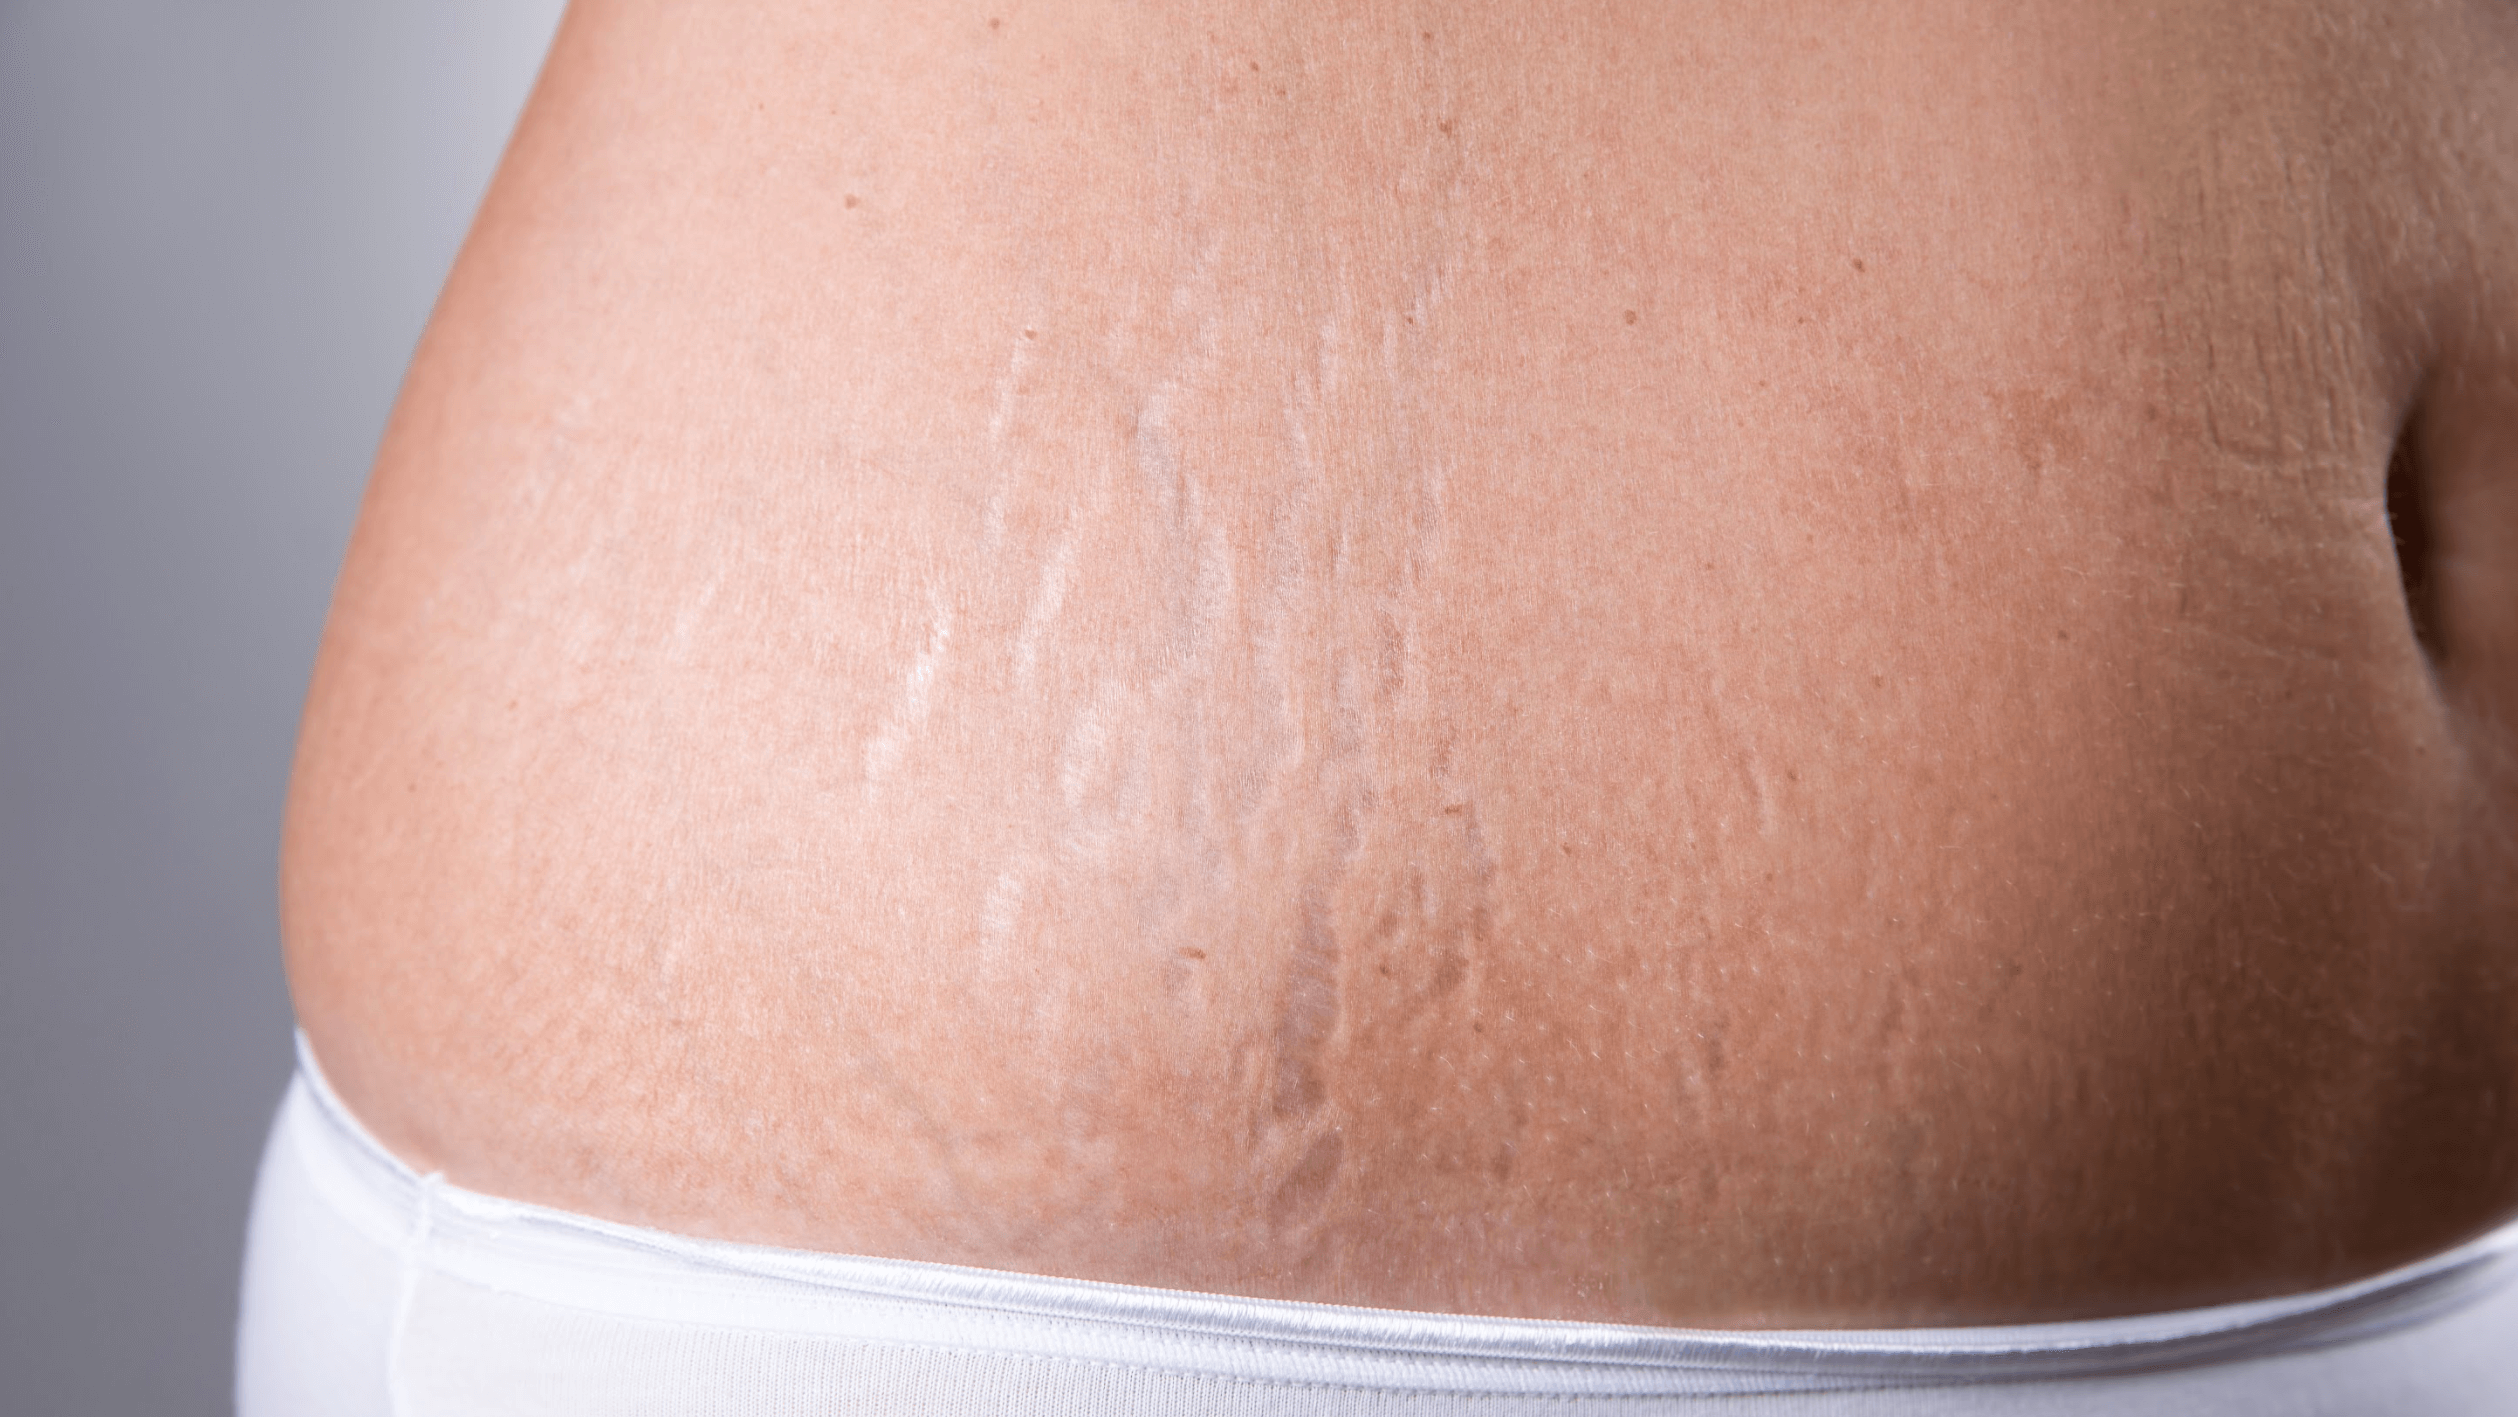 How to Get Rid of Stretch Marks (At Least Temporarily) - Fox News